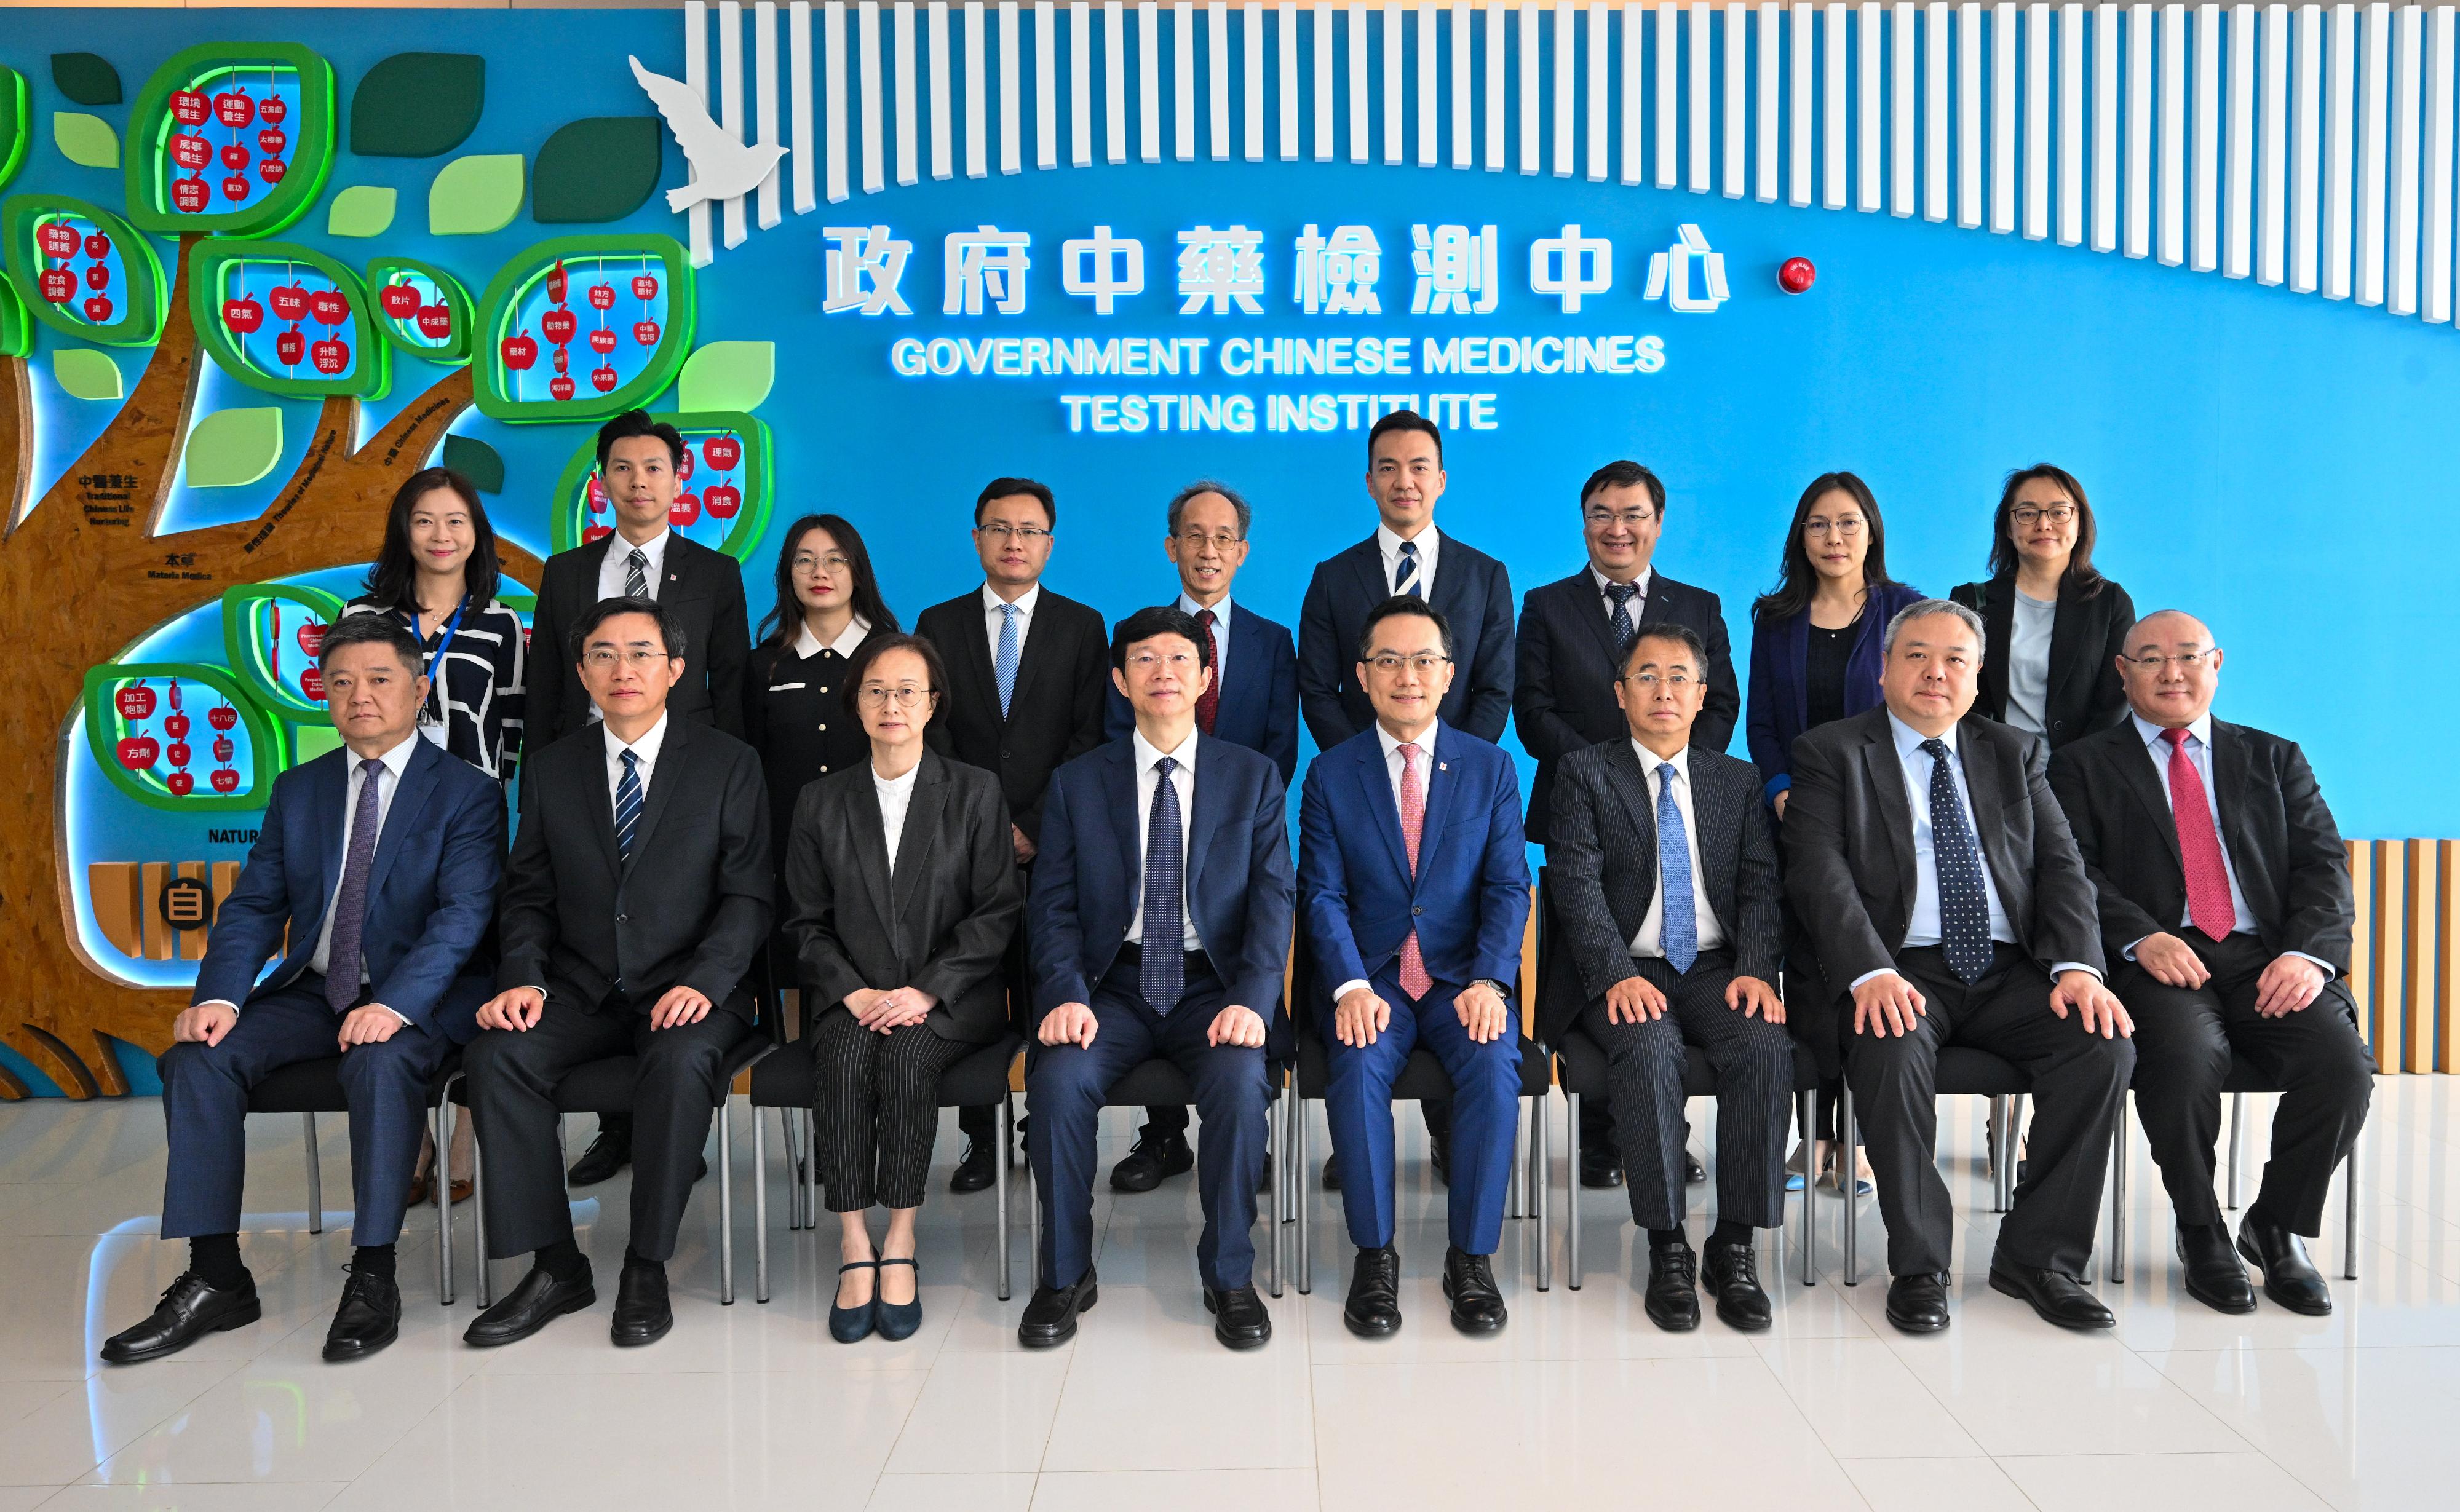 The Department of Health (DH) and National Institutes for Food and Drug Control today (May 9) signed the Co-operation Agreement on Research of Chinese Medicines Standards and on Chinese Medicines Herbarium. Photo shows the Commissioner of the National Medical Products Administration (NMPA), Mr Li Li (front row, fourth left); the Director of Health, Dr Ronald Lam (front row, fourth right); the Director of the Office of Hong Kong, Macao and Taiwan Affairs of the NMPA, Mr Qin Xiaoling (front row, third right); the Director General of the National Institutes for Food and Drug Control, Mr An Fudong (front row, second left); the Controller of Regulatory Affairs of the DH, Dr Amy Chiu (front row, third left); the Director General of the Center for Drug Evaluation of the NMPA, Mr Zhou Siyuan (front row, second right); the Director General of the Center for Medical Device Evaluation of the NMPA, Mr Sun Lei (front row, first left); and the Hong Kong Representative of the National Health Commission, Mr Bi Wenhan (front row, first right), with the delegation after the visit to the Government Chinese Medicines Testing Institute.
